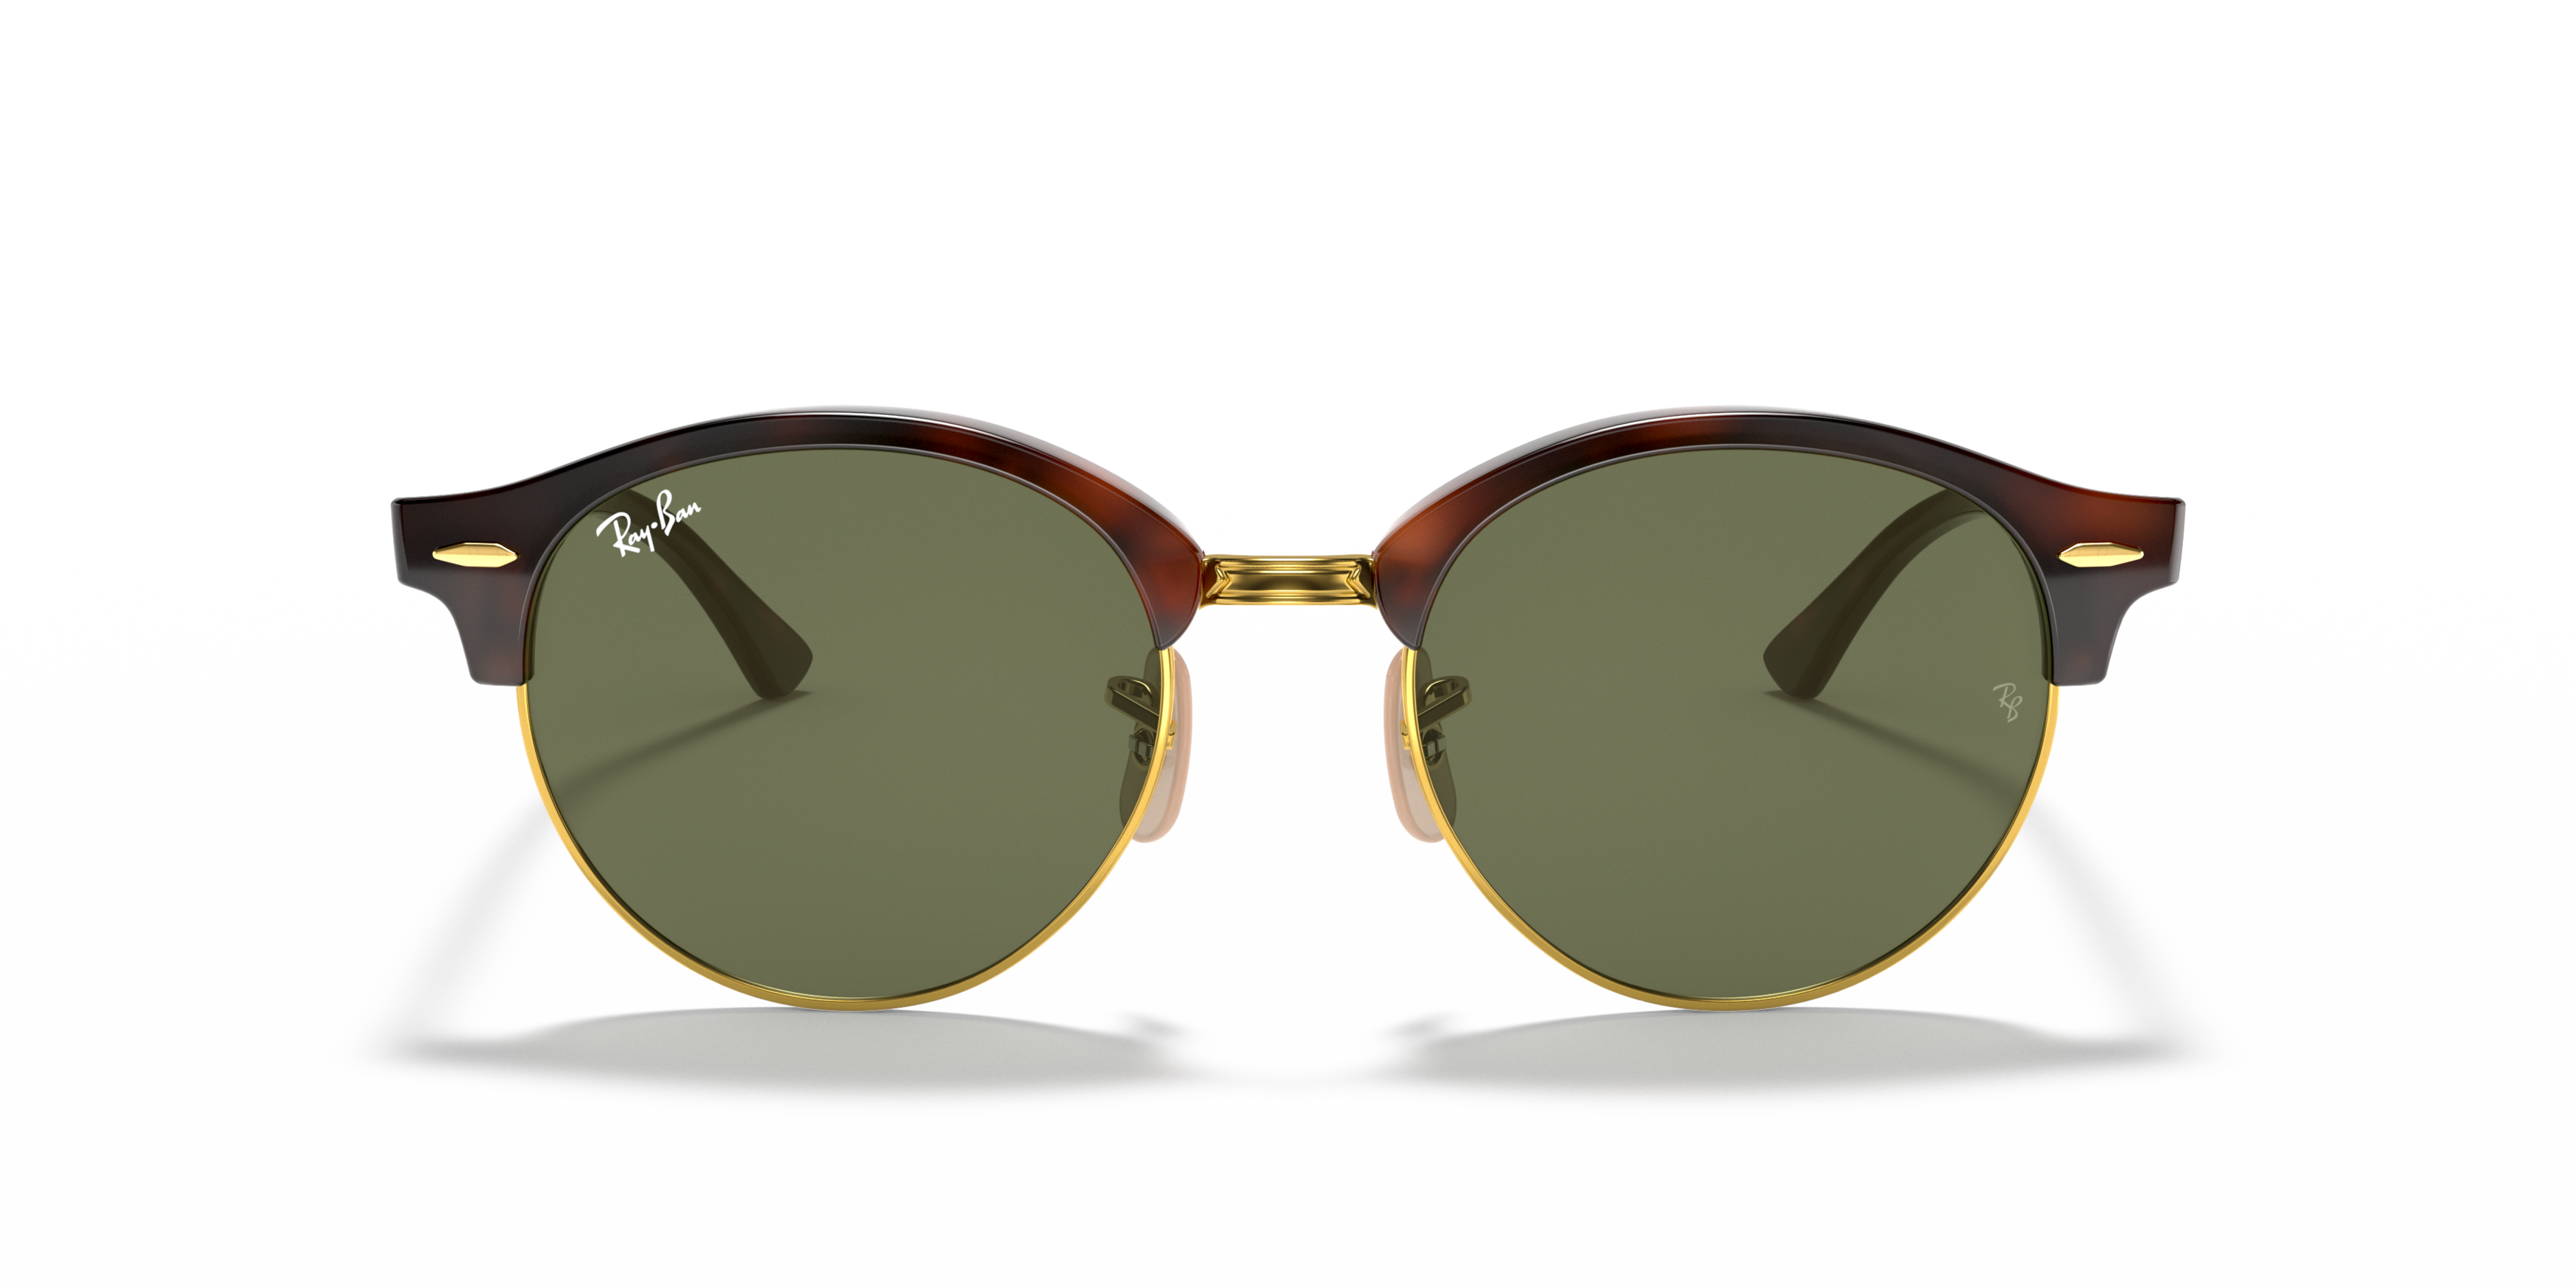 [products.image.front] Ray-Ban CLUBROUND 990